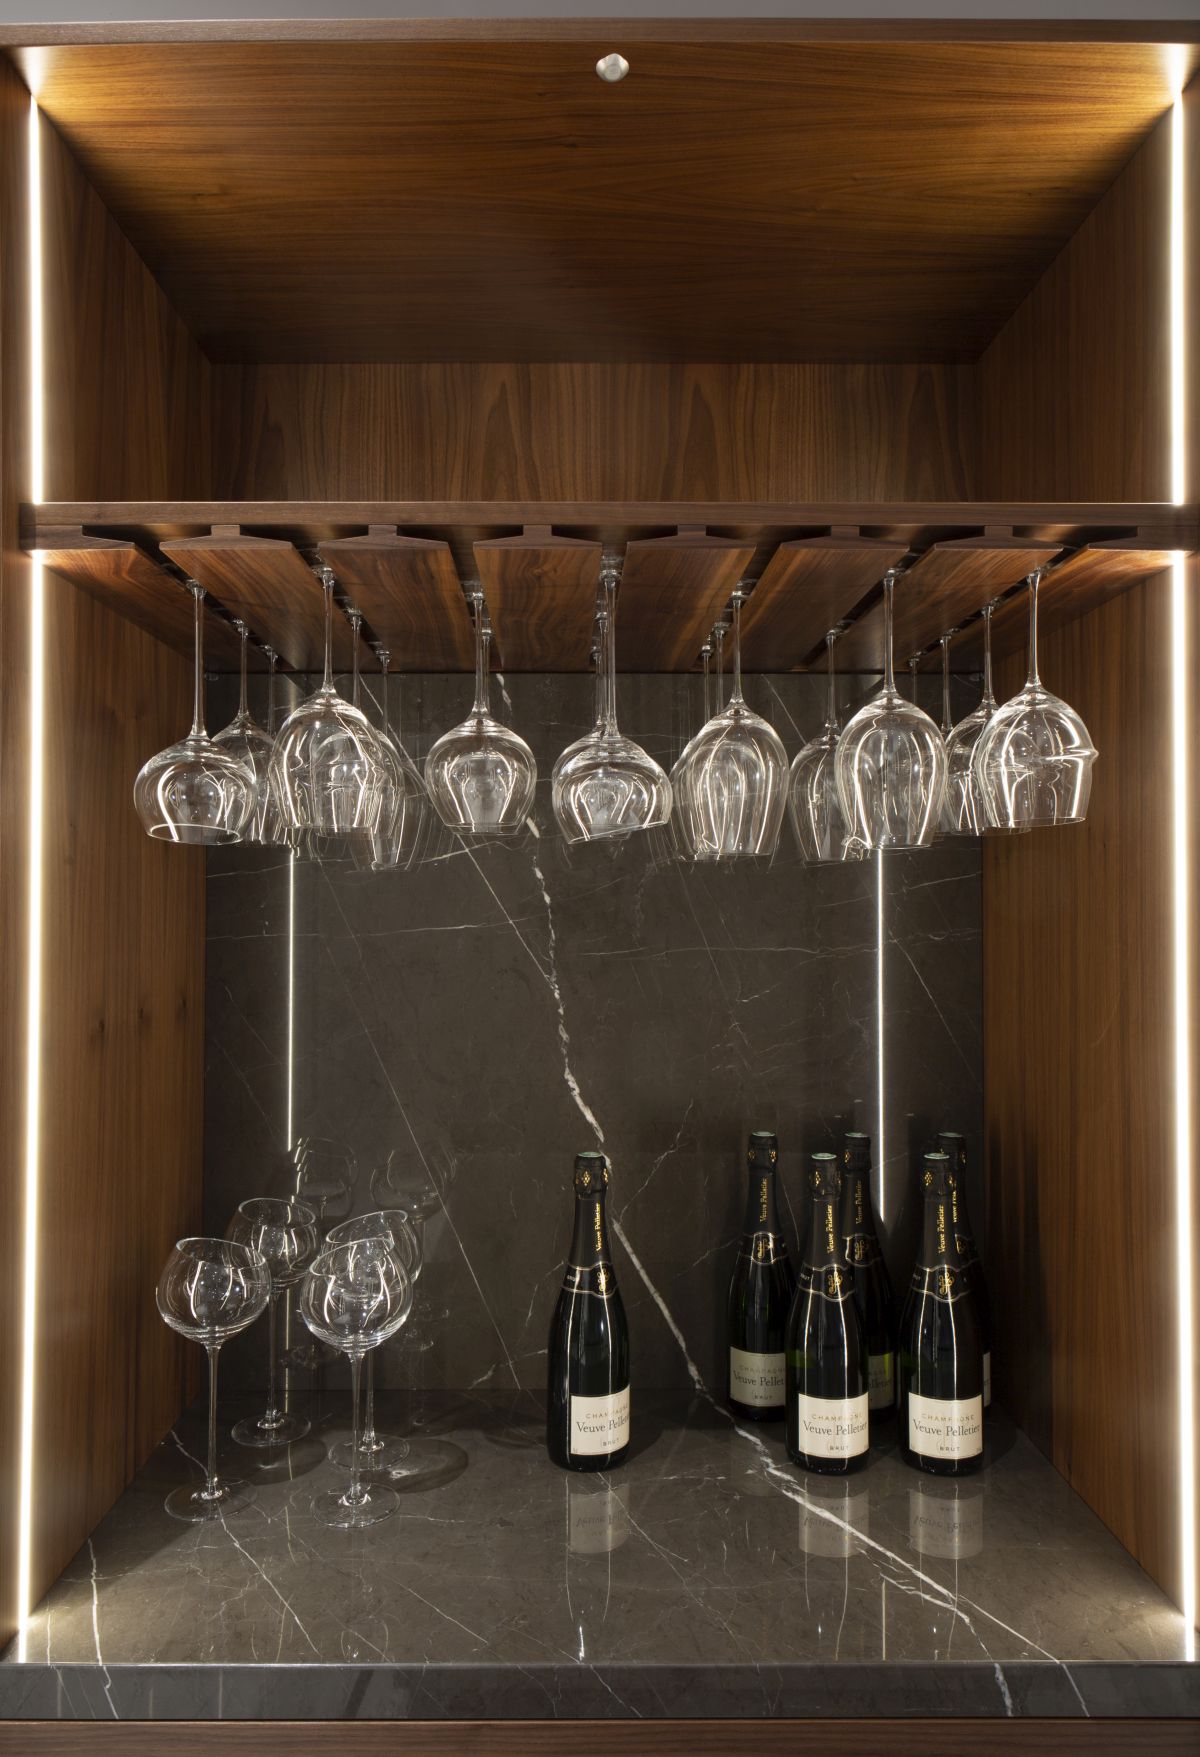 An elegant glass holding rack is seamlessly integrated into the bar unit, adding function without complicating the aesthetic